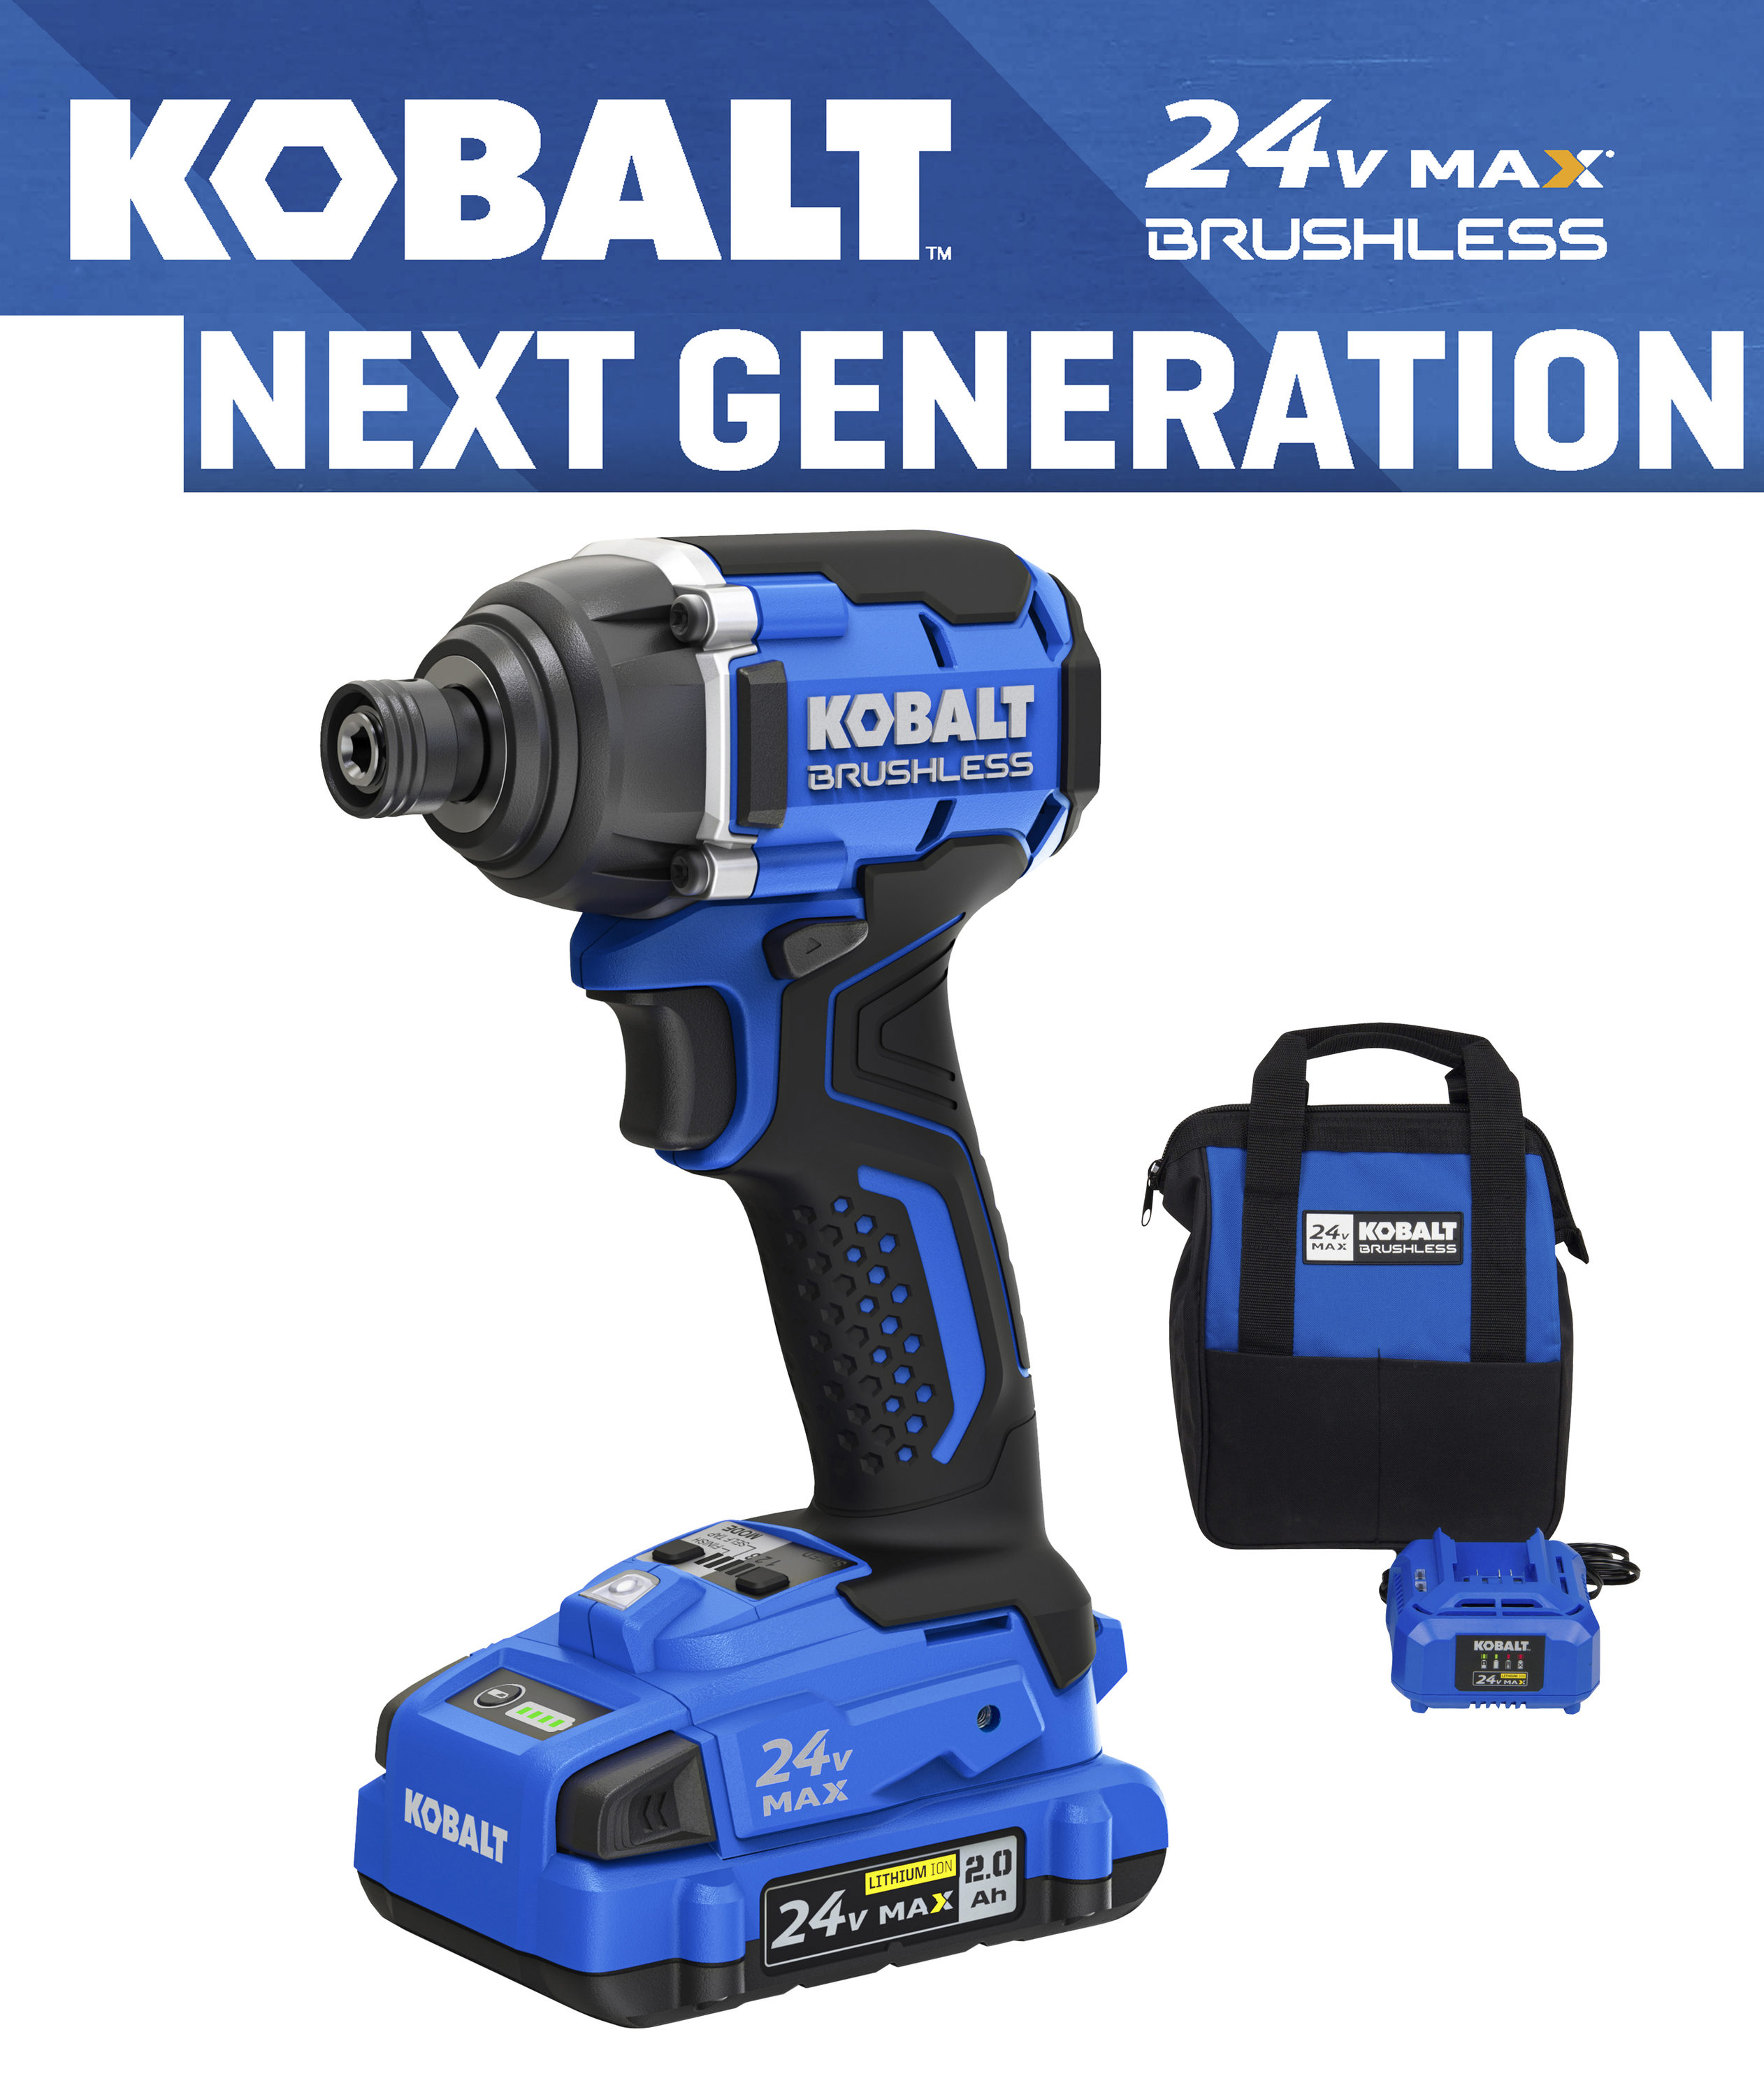 Kobalt 24-volt Max 1/4-in Variable Speed Brushless Cordless Impact Driver (1-Battery Included)